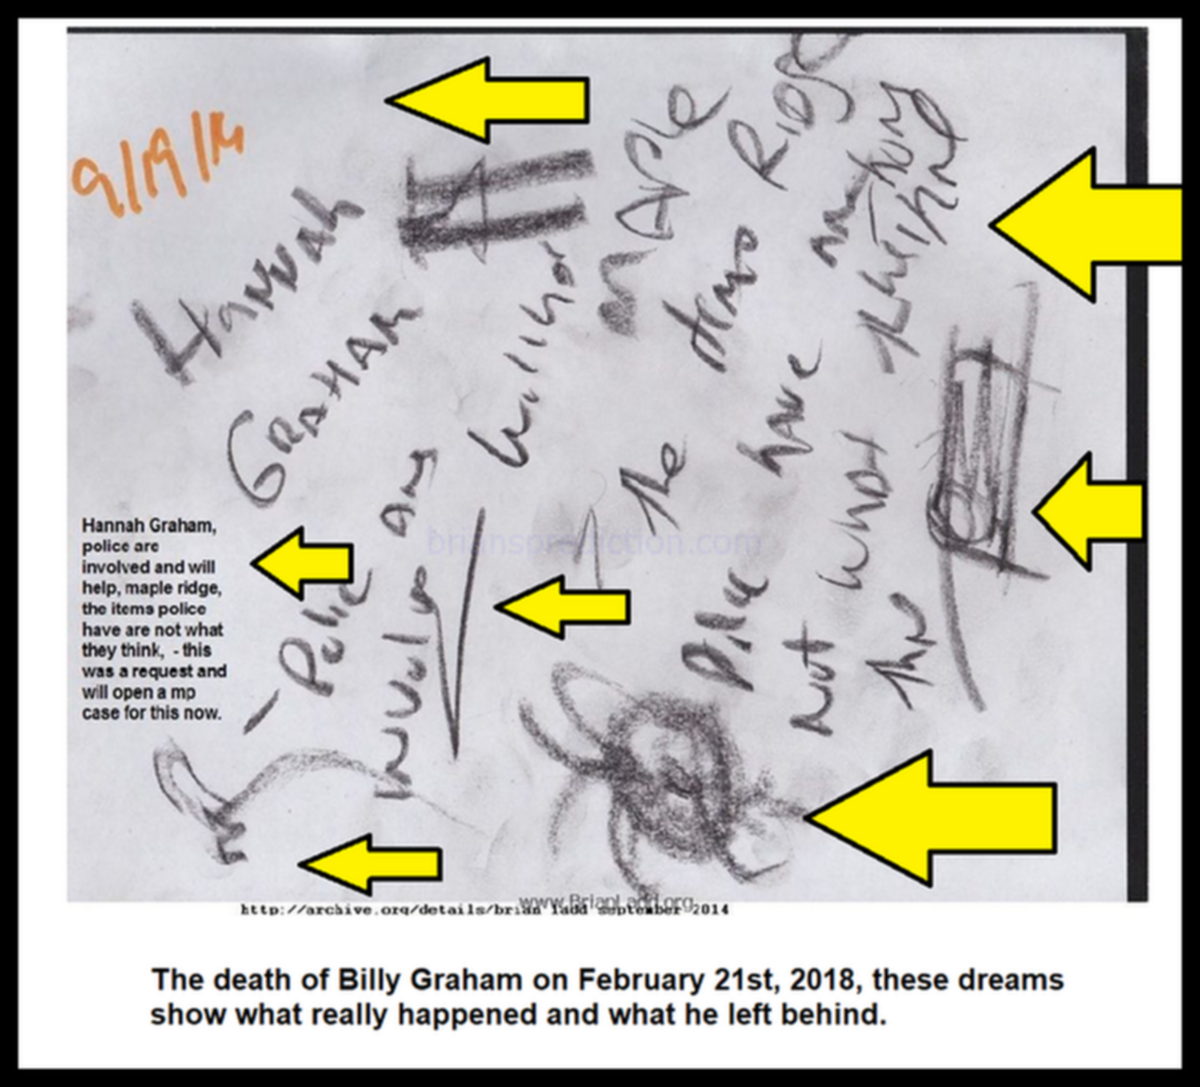 Hannah Graham The death of Billy Graham on February 21st 2018 these dreams show what really happened and what he left behind psychic~0
Hannah Graham The death of Billy Graham on February 21st 2018 these dreams show what really happened and what he left behind psychic~0
